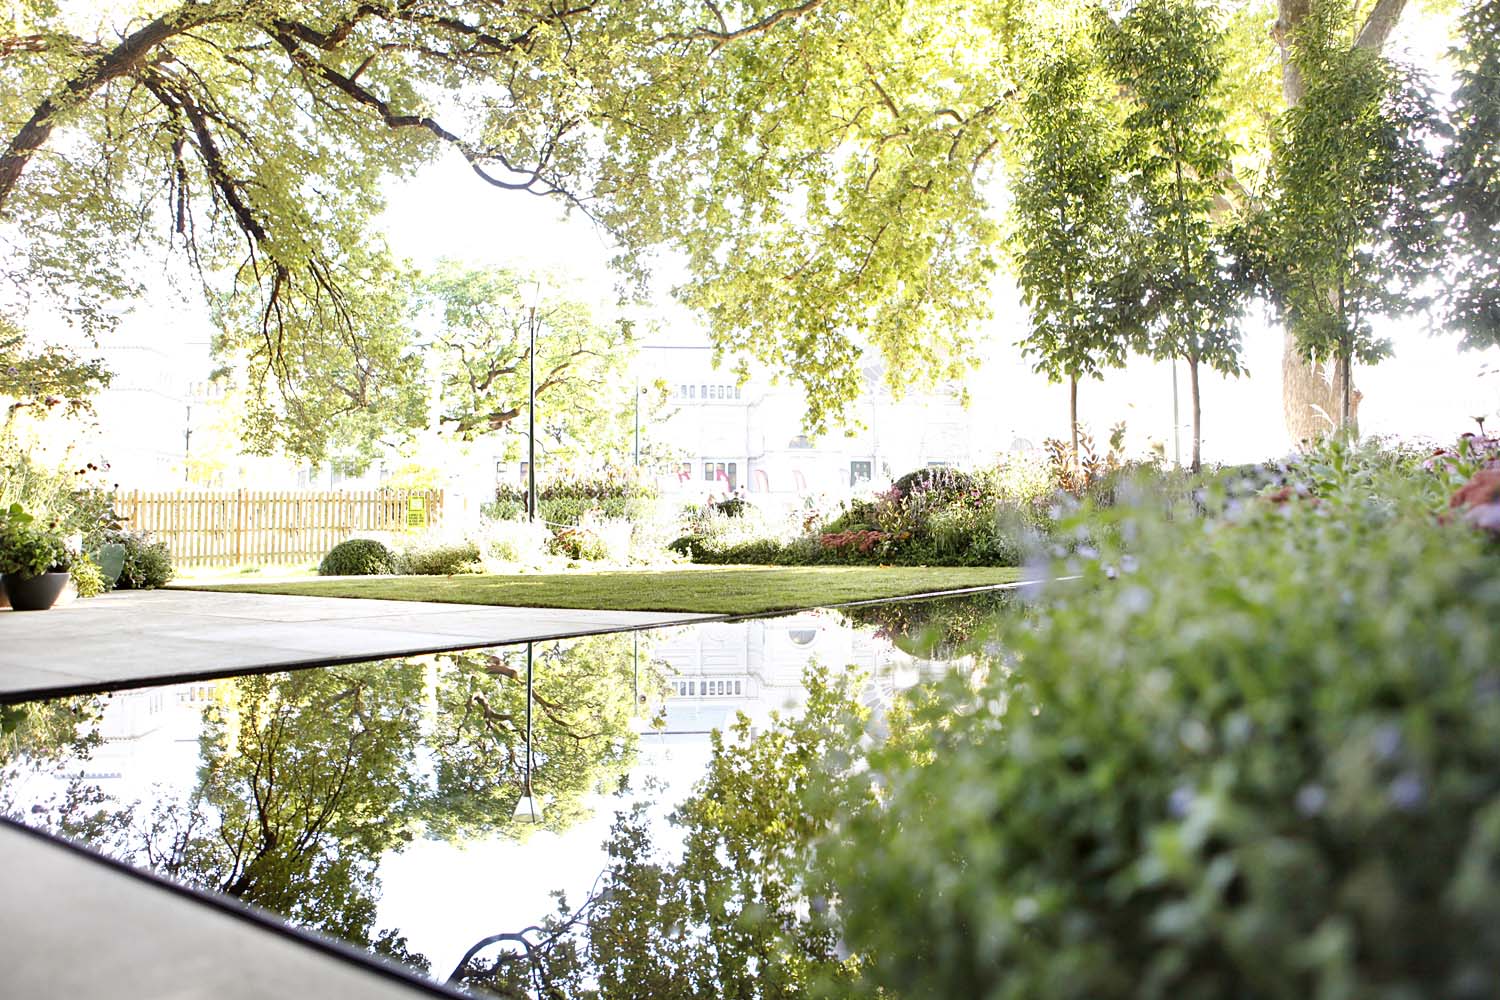 Beautiful trees in the Carlton Gardens reflect onto the surface of the black pool in 'The New Wave' by Ian Barker Gardens at MIFGS 2013